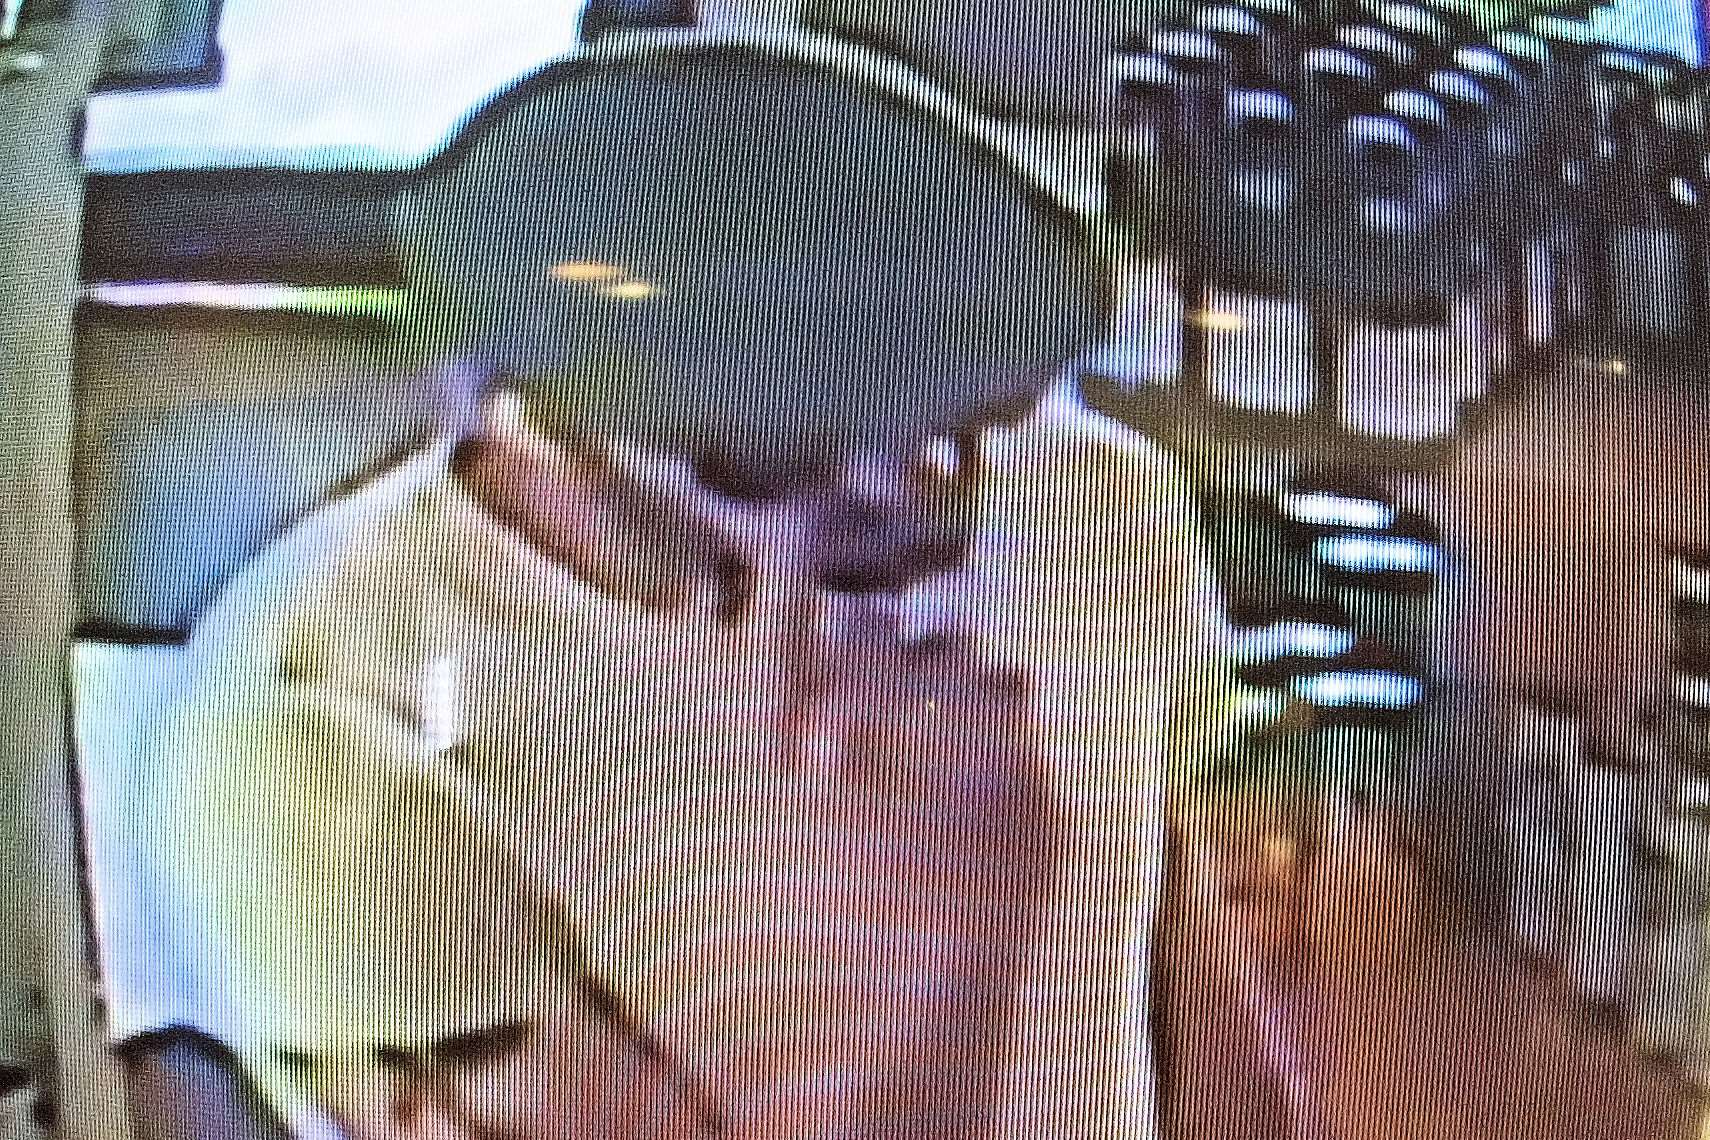 CCTV footage from the store